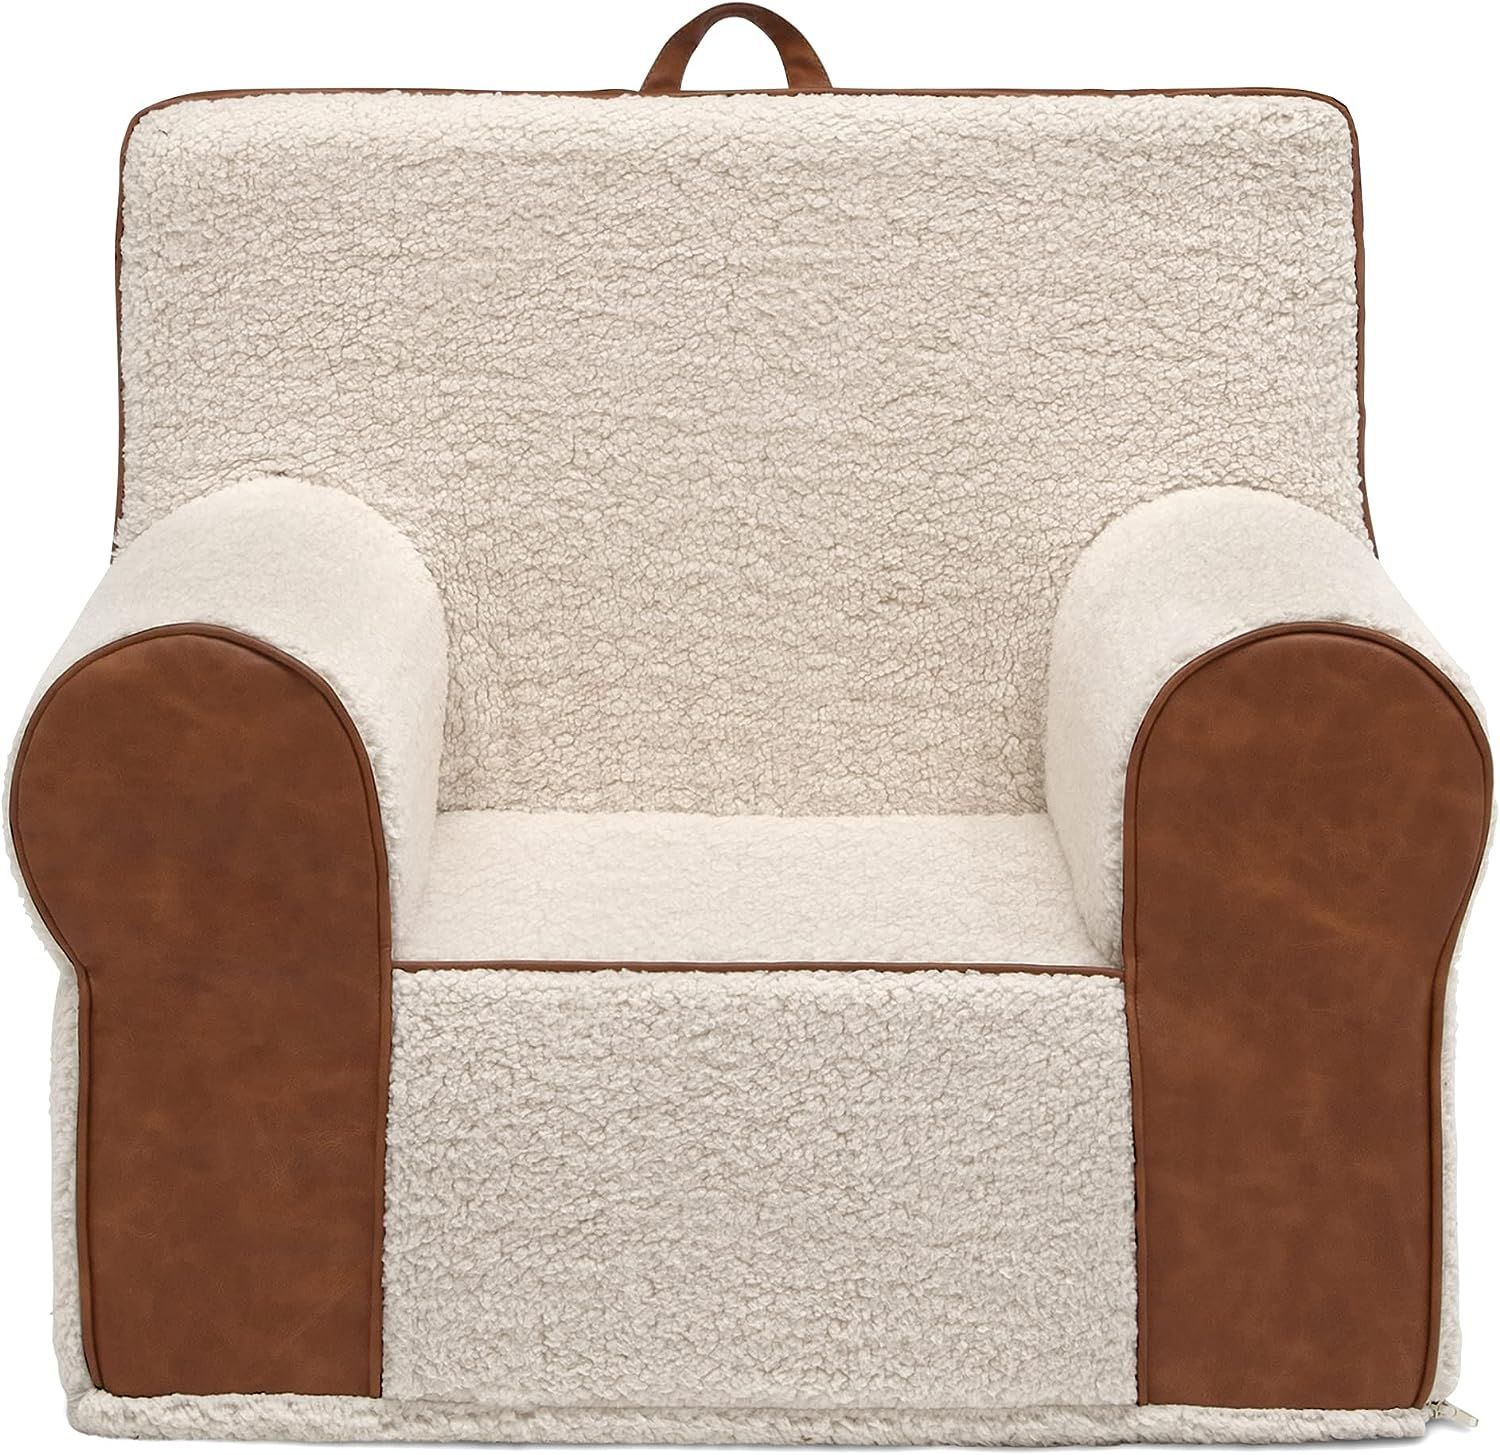 Delta Children Deluxe Cozee Sherpa Chair for Kids, Cream Sherpa/Faux Leather | Amazon (US)